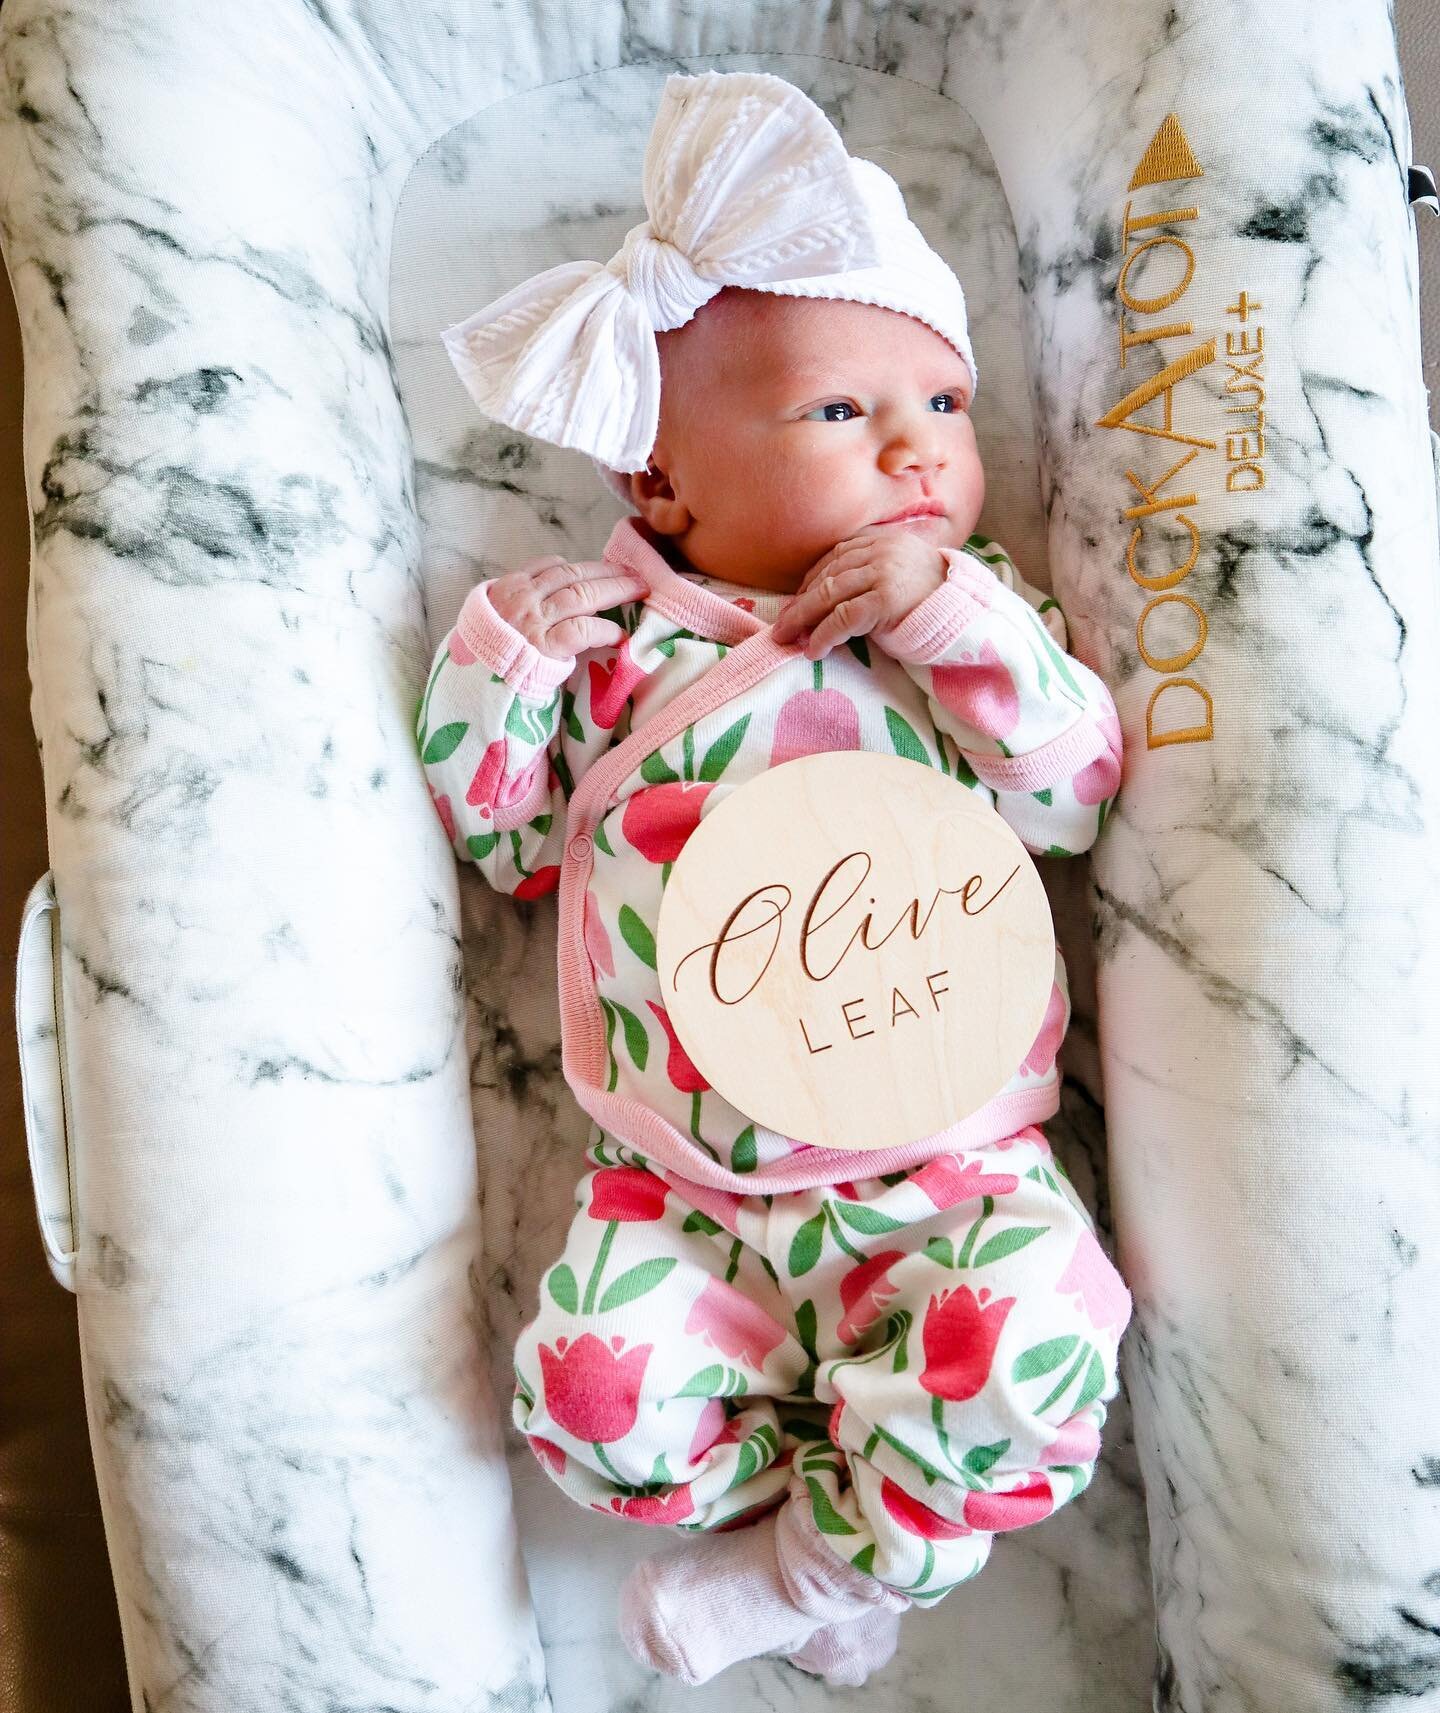 Introducing the newest member to the family!

Olive Leaf🧿
Born on 5/3, 6 lbs 9 oz✨